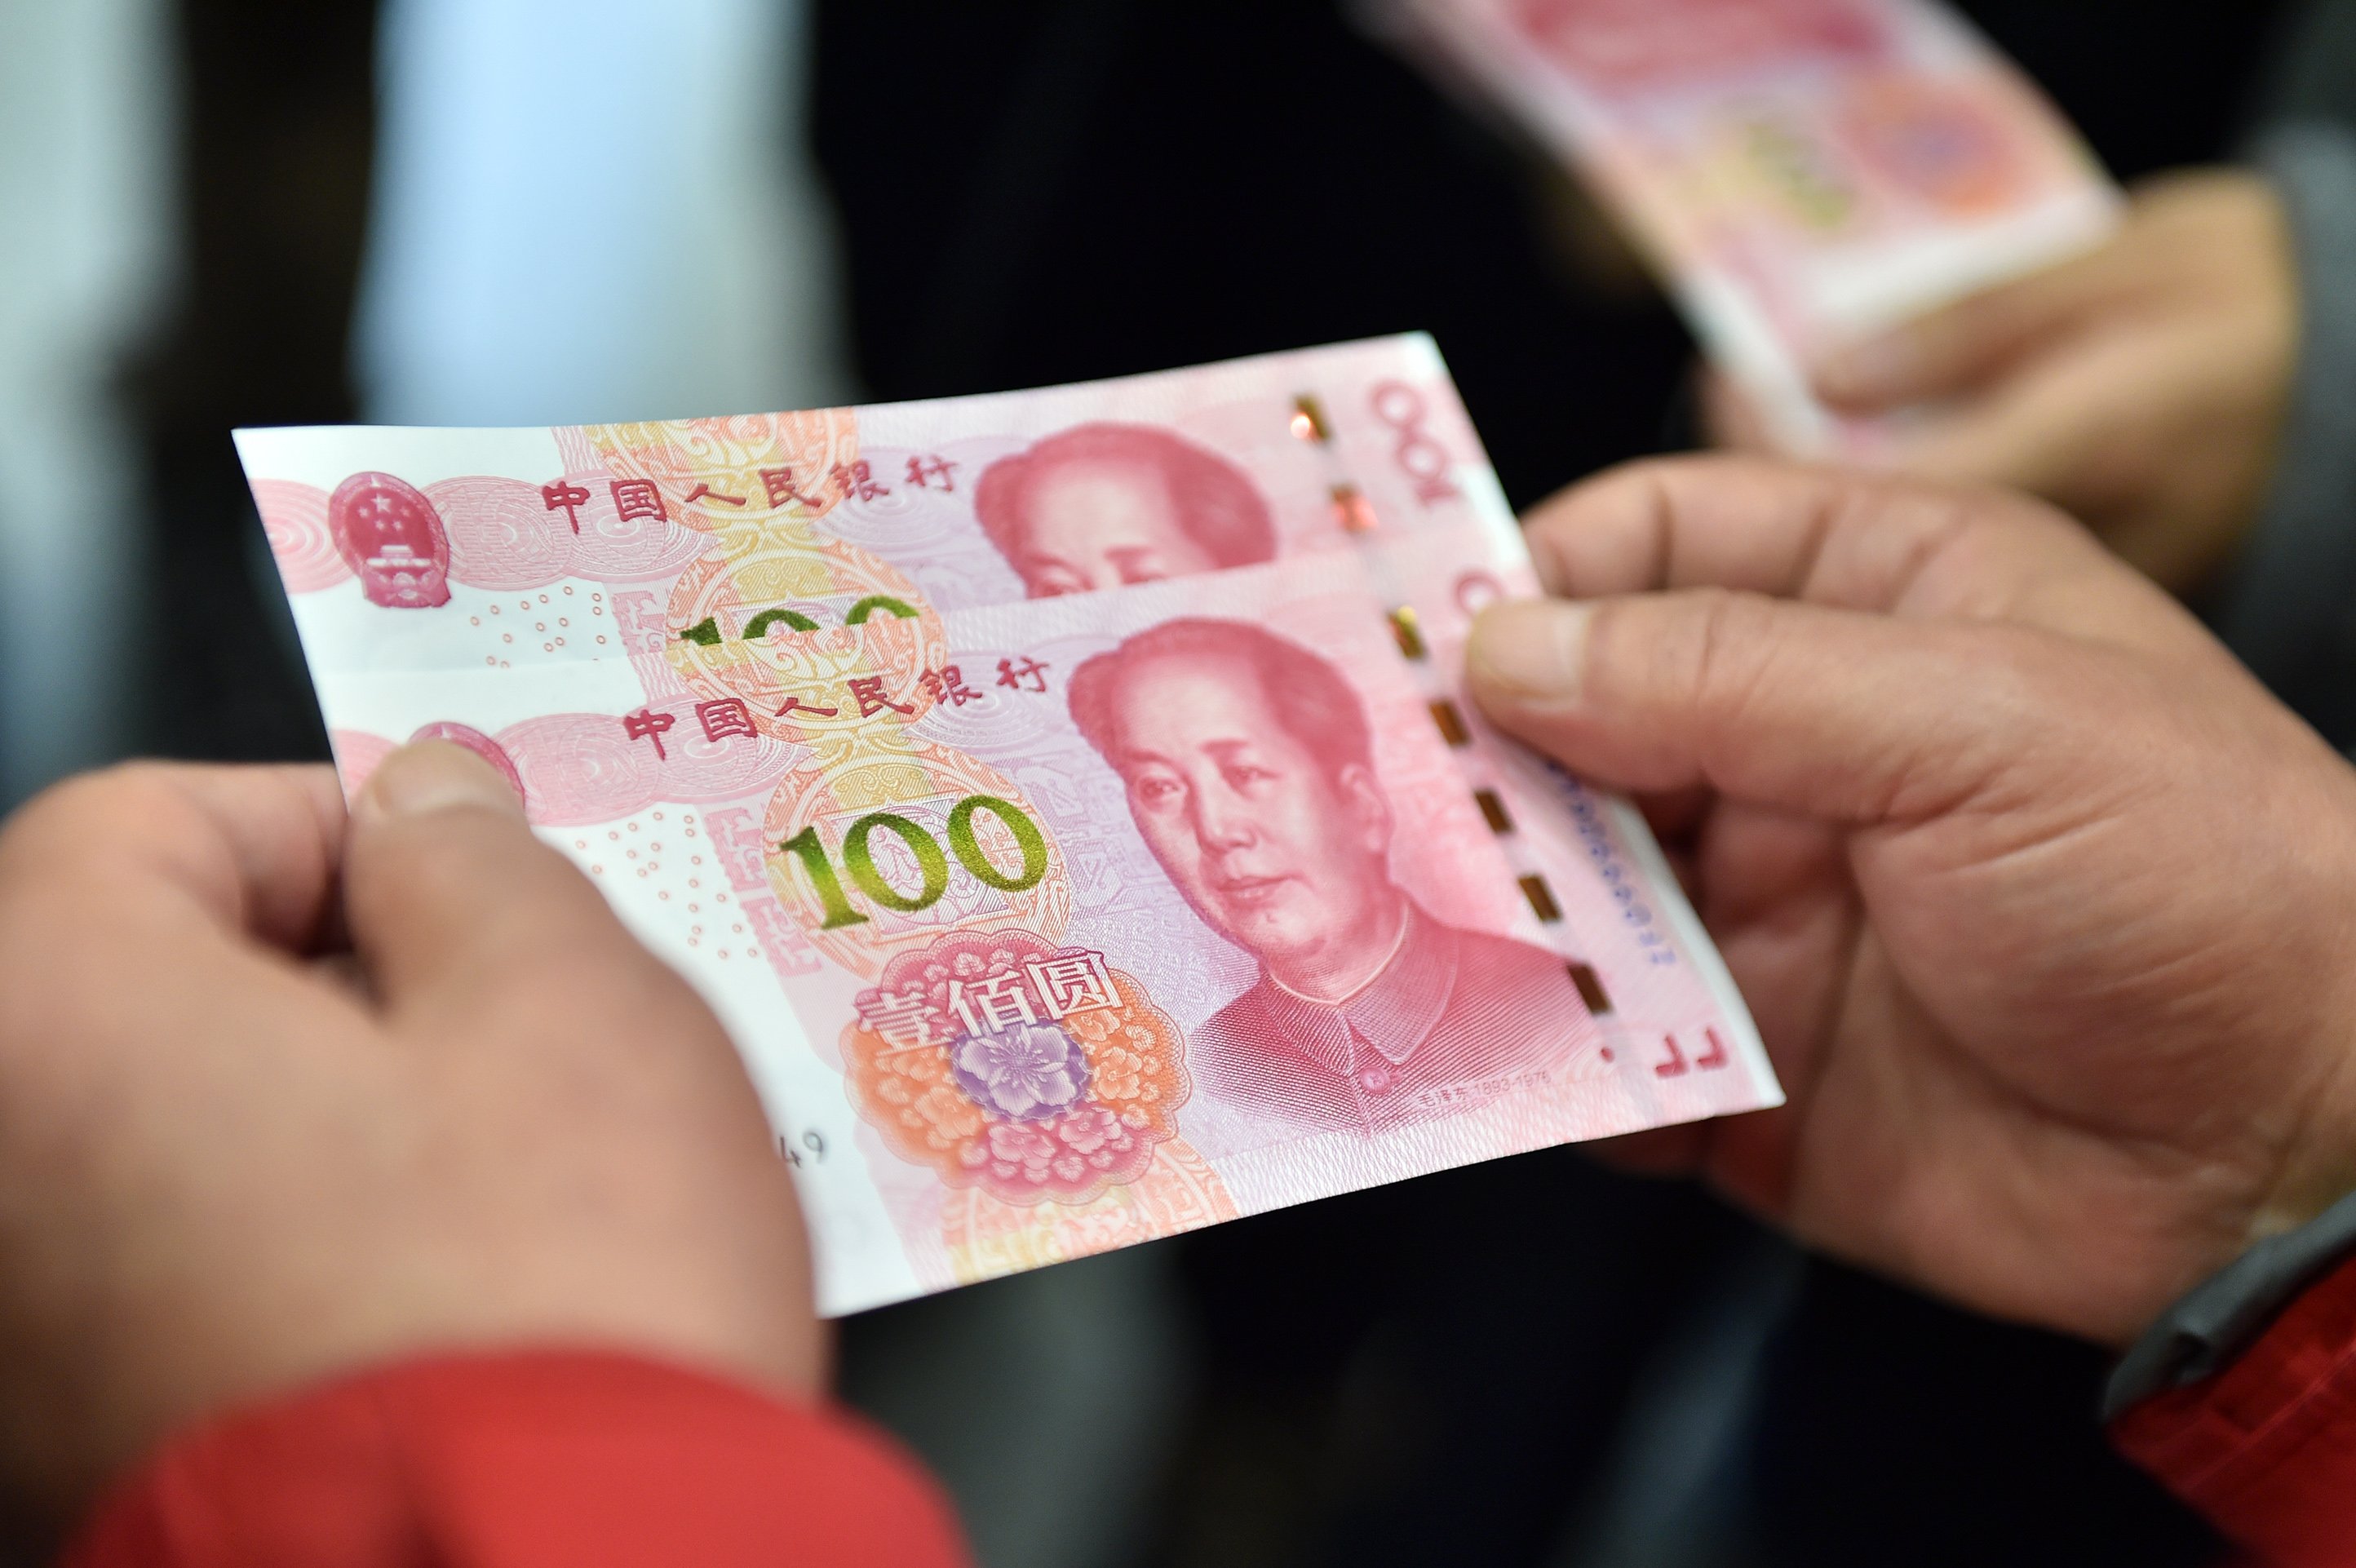 (151112) -- BEIJING, Nov. 12, 2015 (Xinhua) -- Residents hold two new 100-yuan banknotes withdrawn from the Beijing Branch of the Bank of Communication in Beijing, capital of China. China's central bank released a new 100-yuan banknote on Thursday. The design stays largely the same as its former series, but the new banknotes are harder to conterfeit and easier for machines to read. The 100-yuan note is the largest denomination of the Chinese currency. (Xinhua/Li Xin) (lfj)